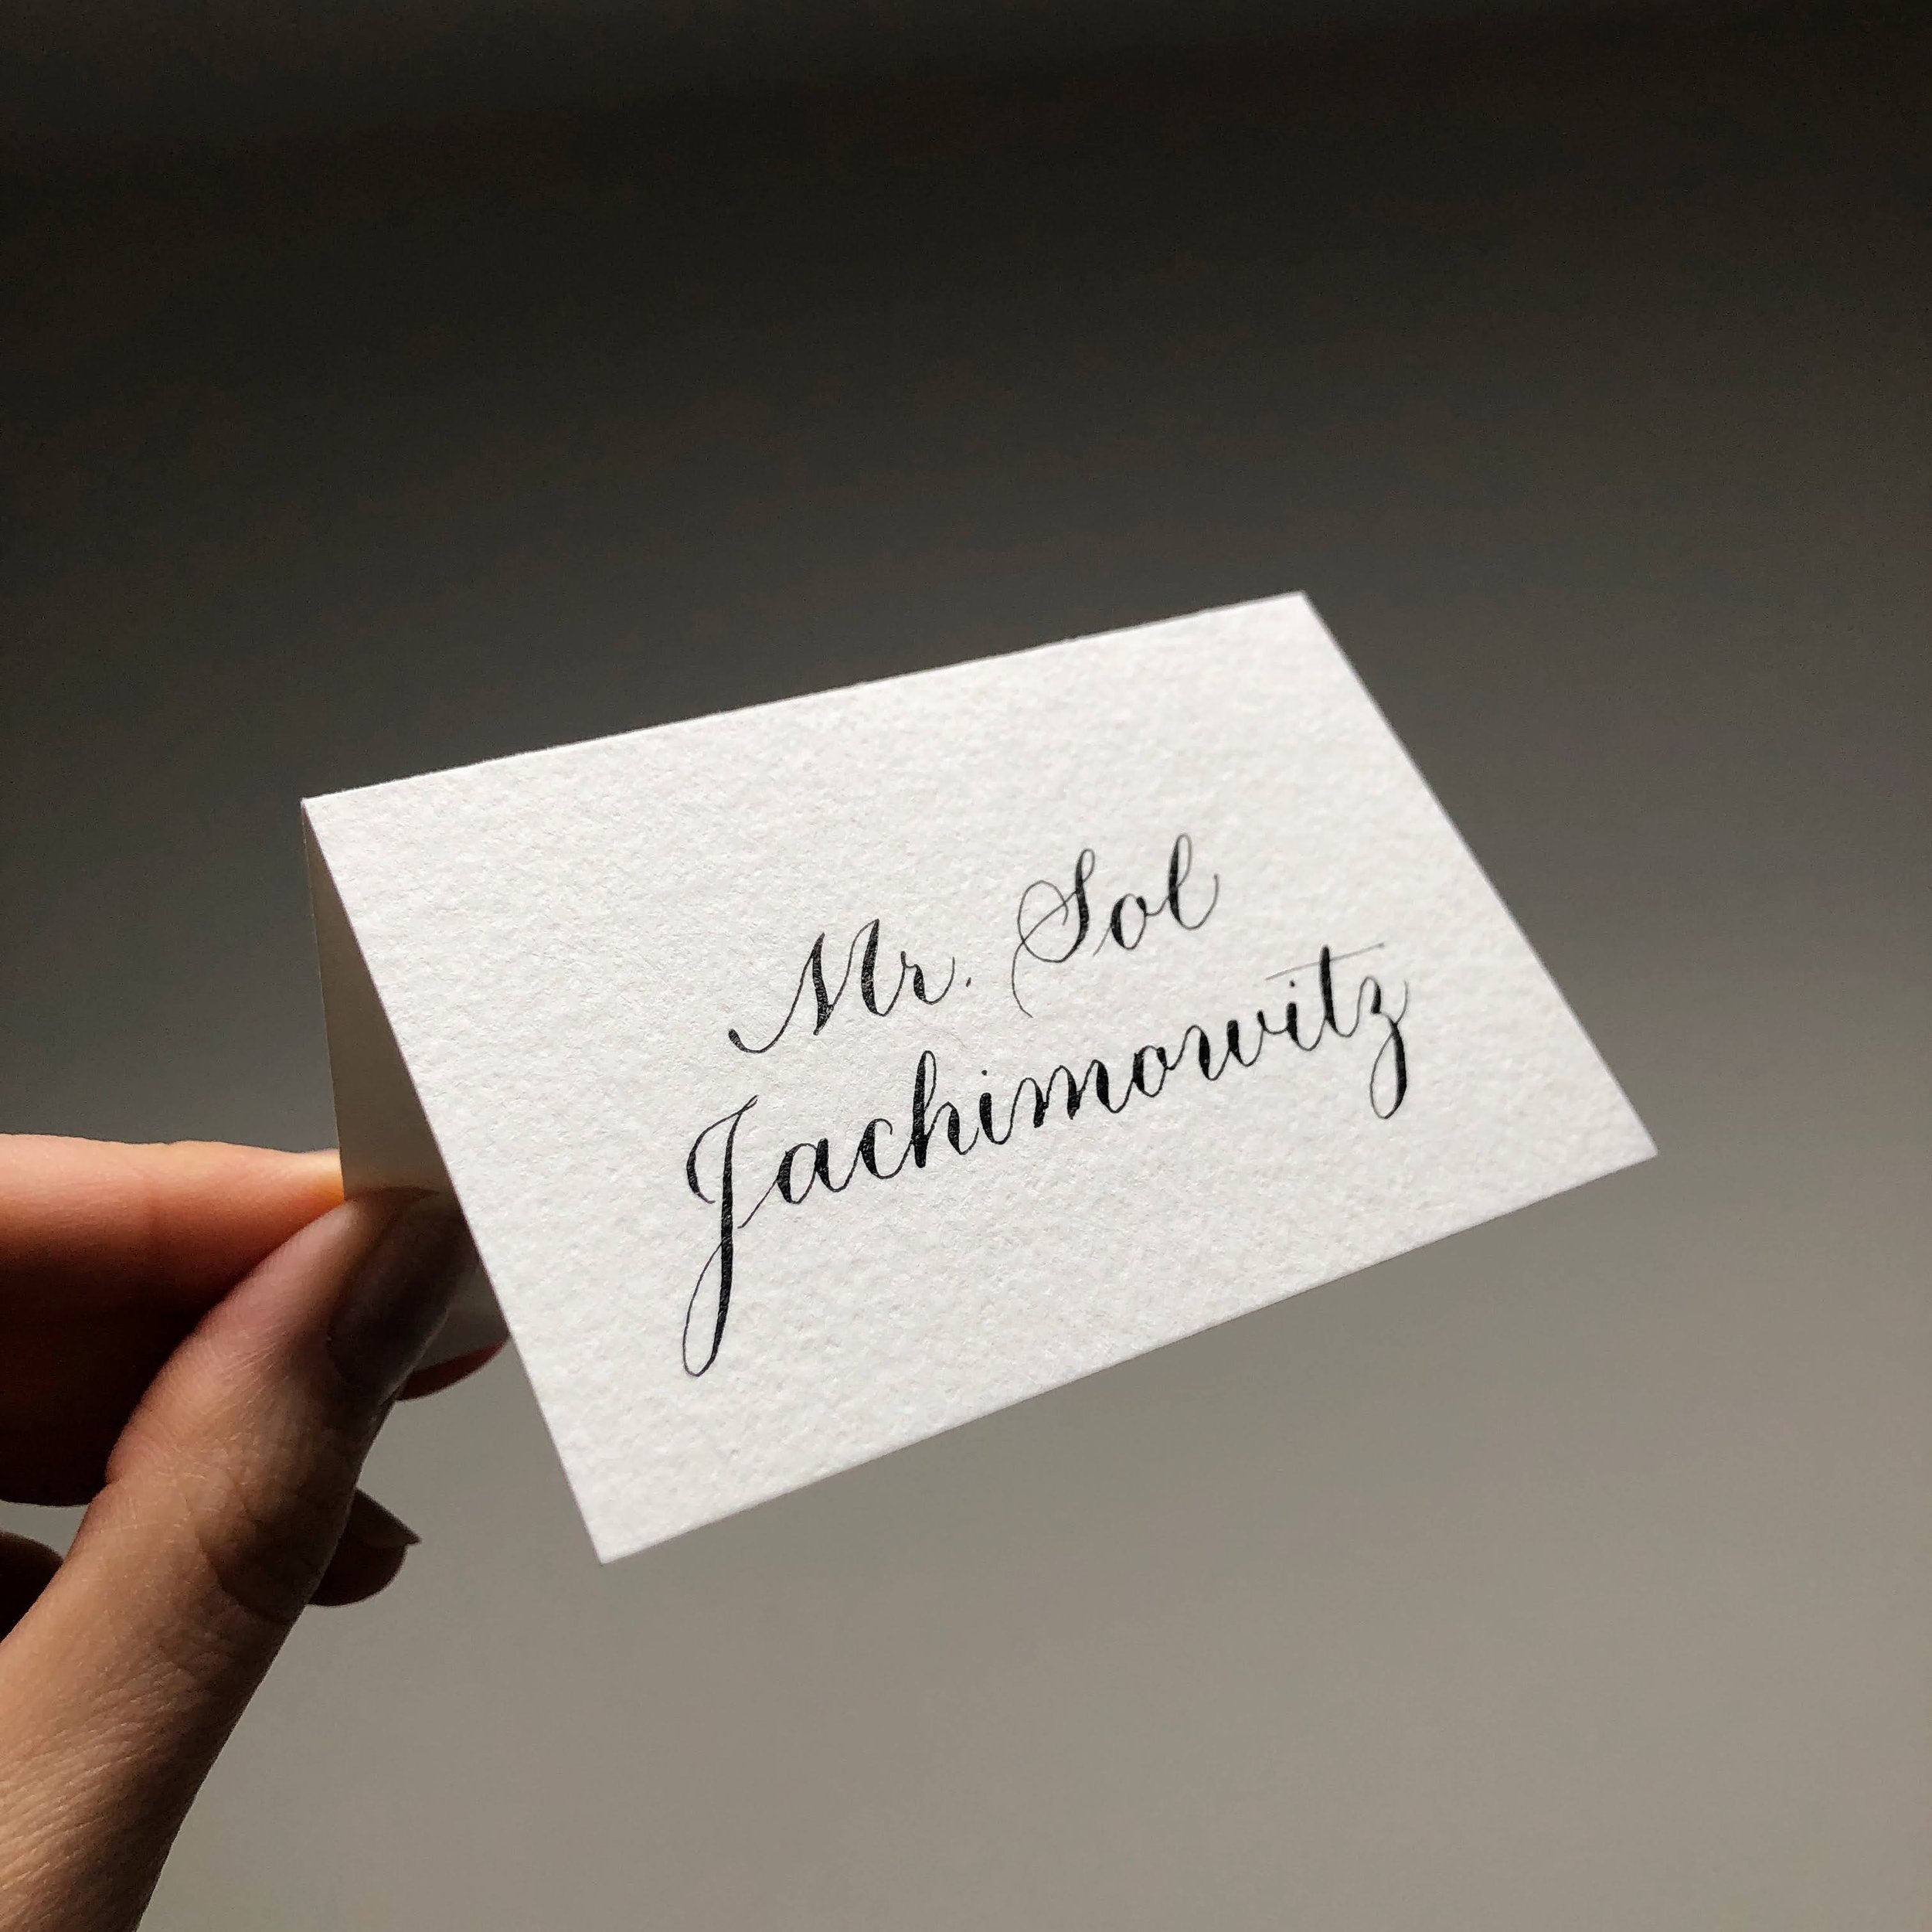 Handwritten Place Cards for Private Event